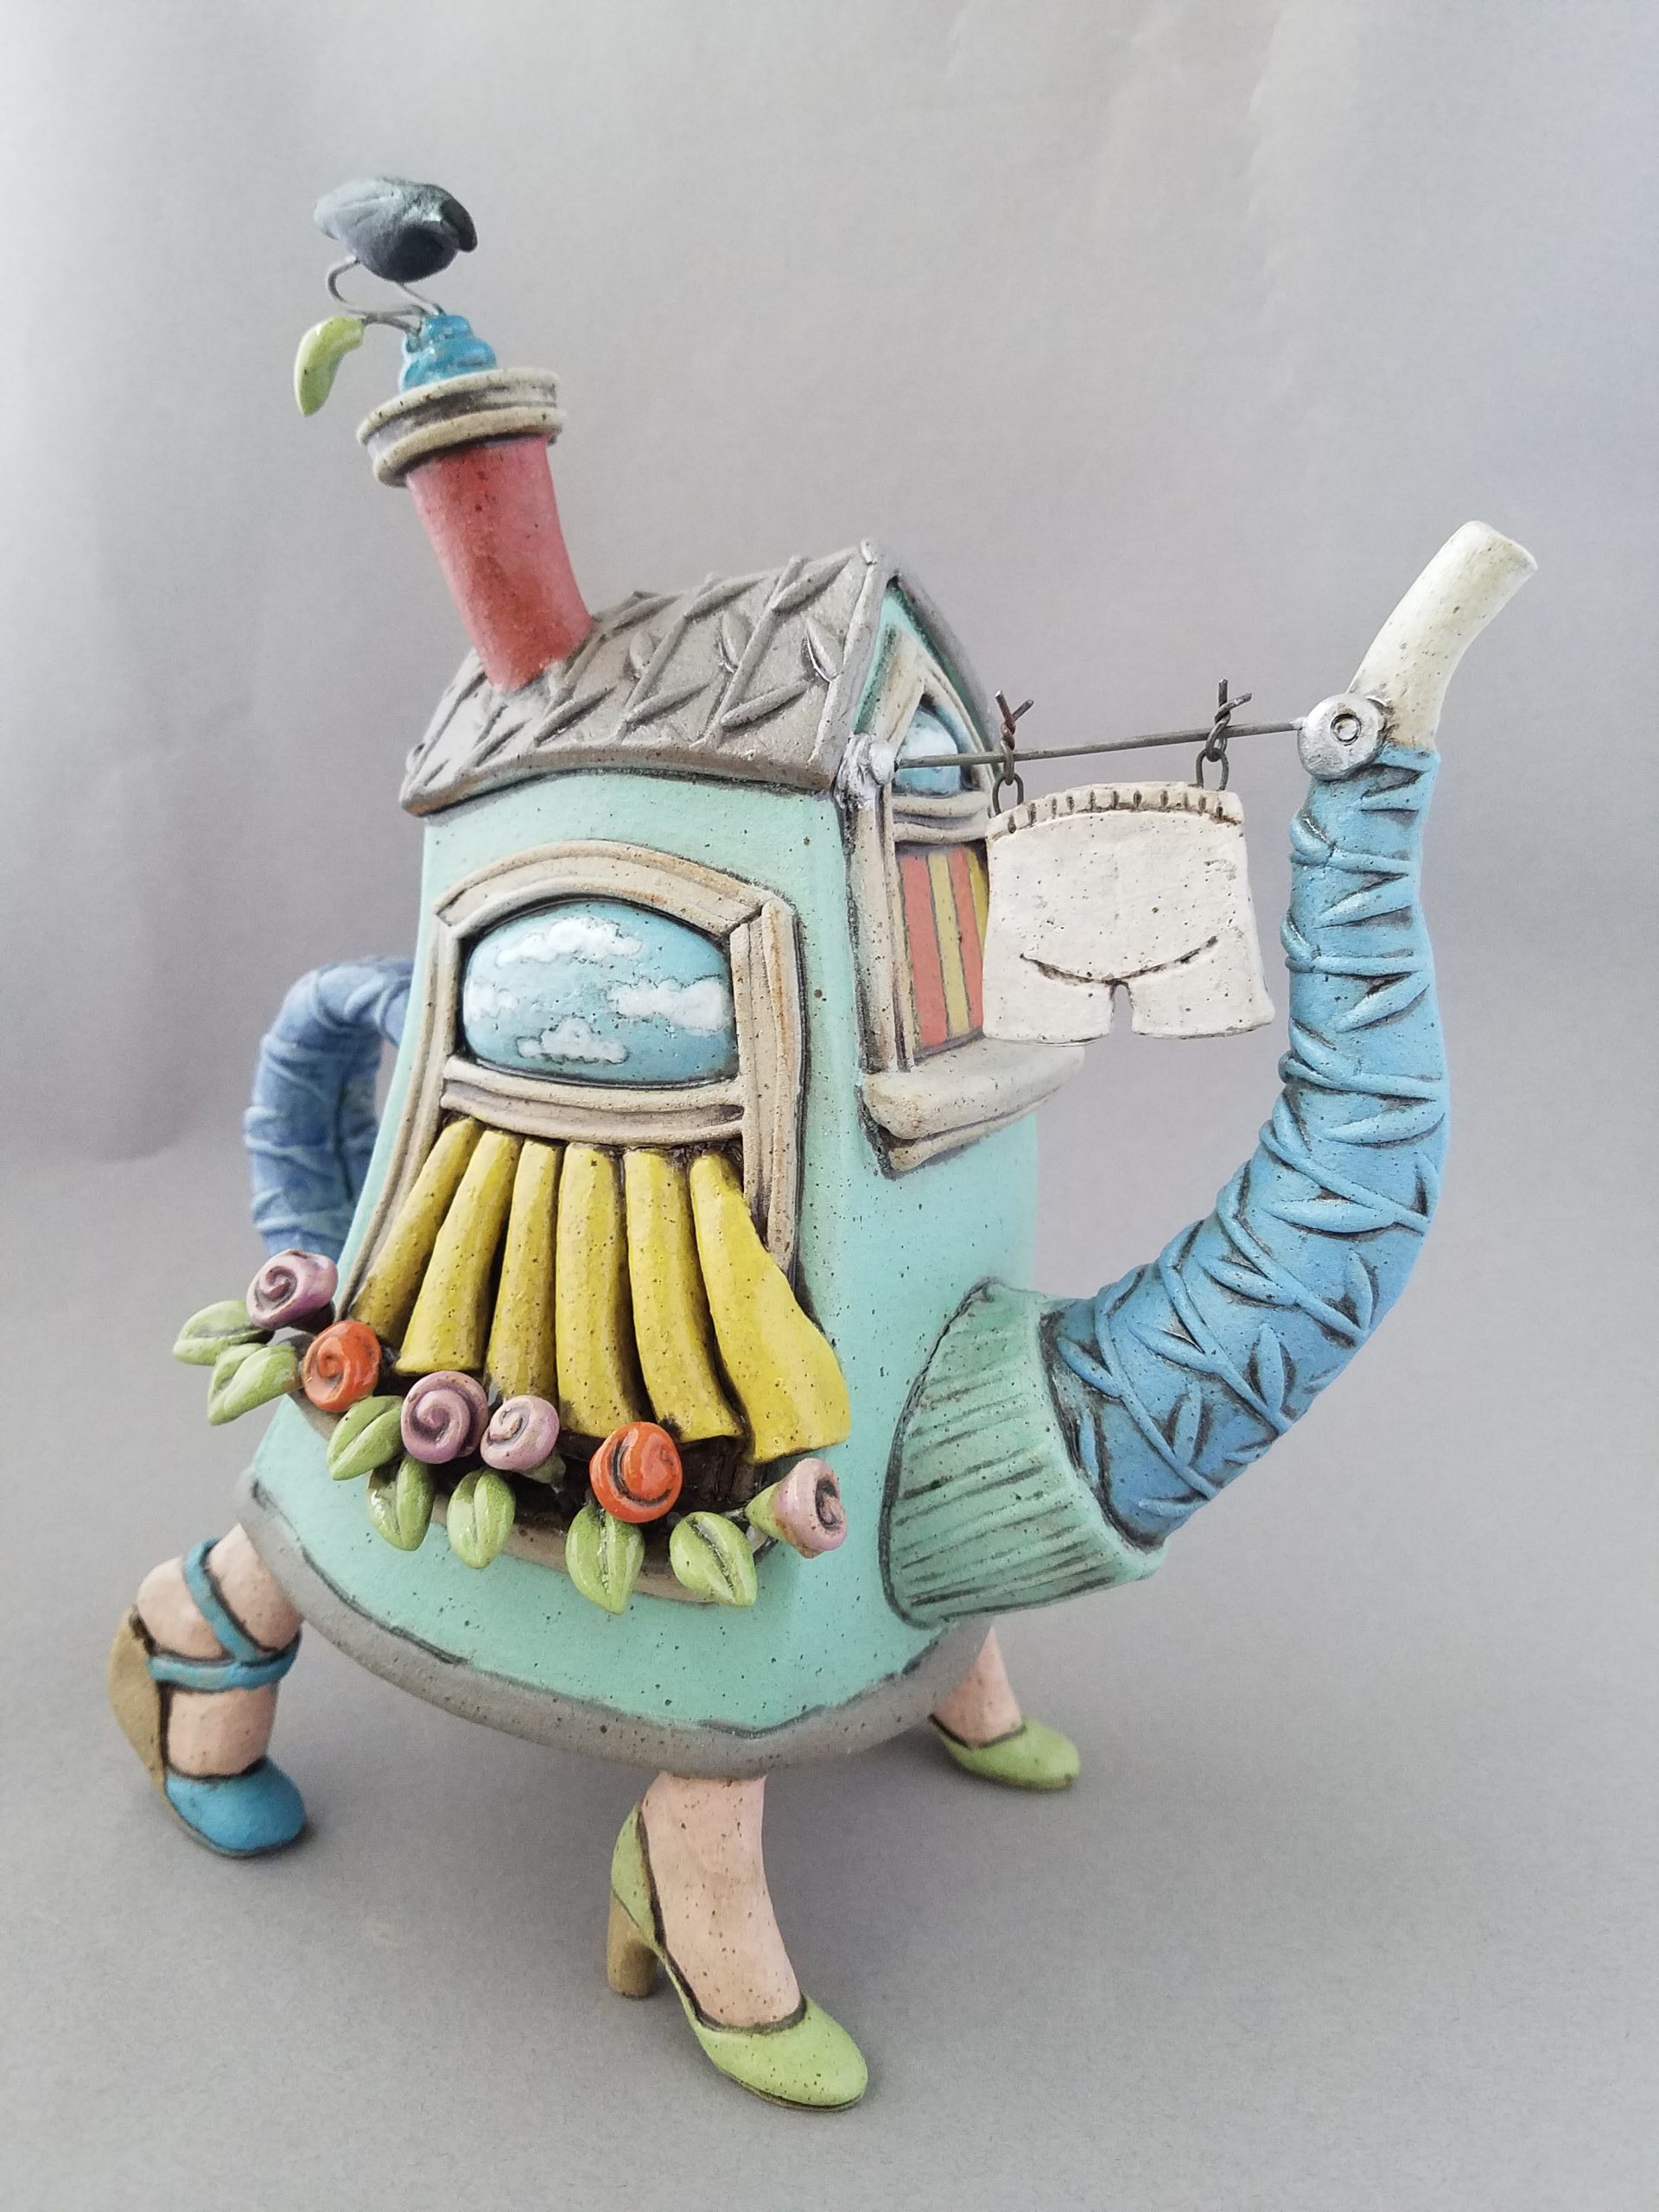 Cory McCrory, A Walk Around the Block, 2019, paper clay stoneware and underglaze, 8x7.5x4 inches, collection of the artist